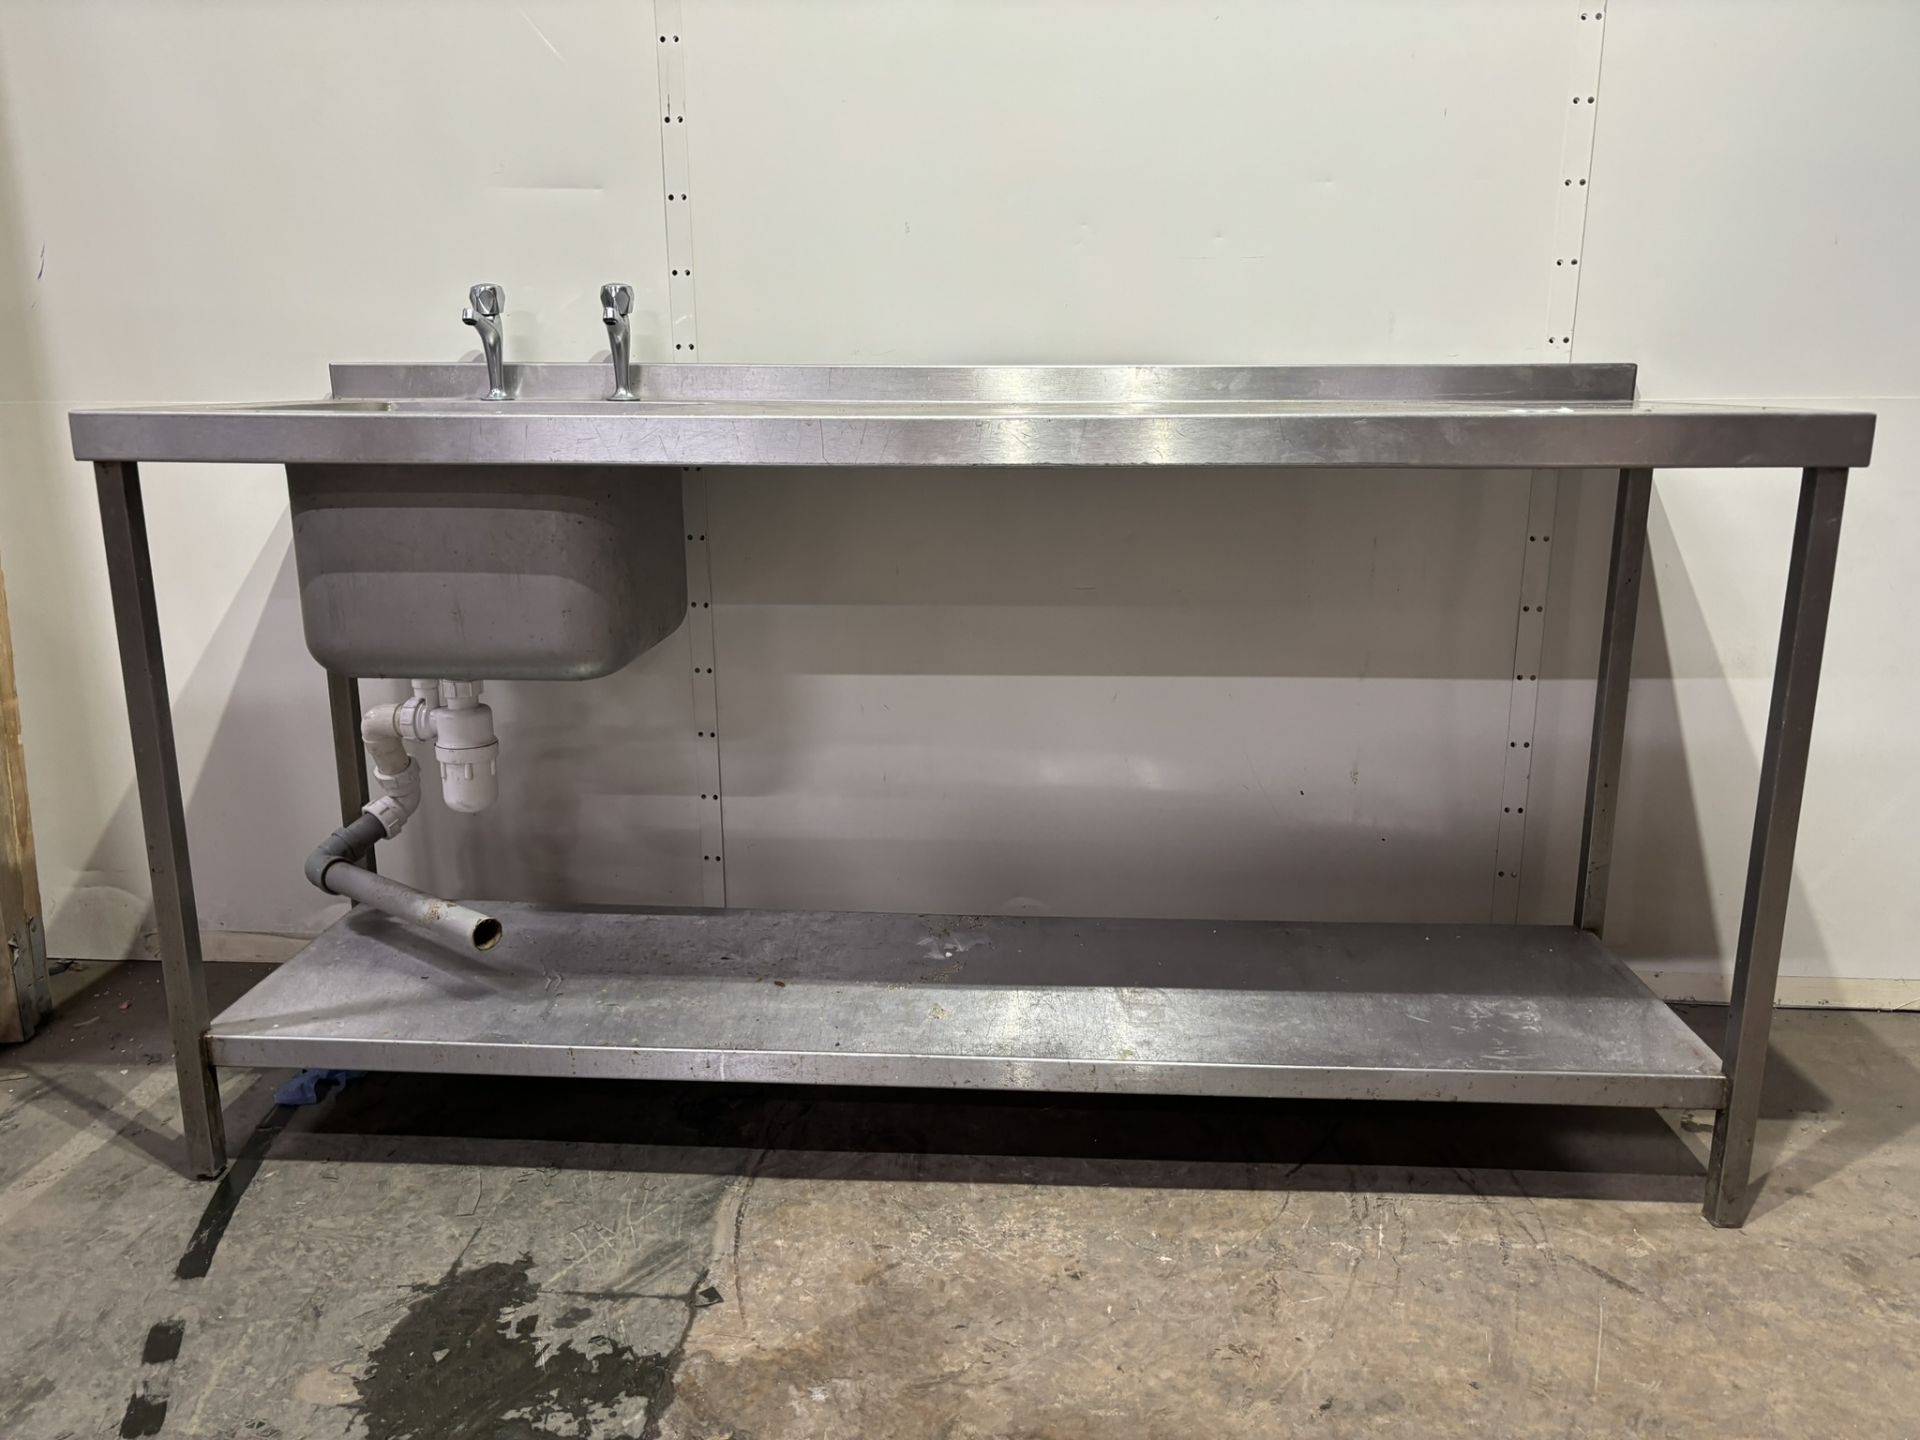 1800mm Stainless Steel Commercial Single Sink Catering Table - Image 2 of 8